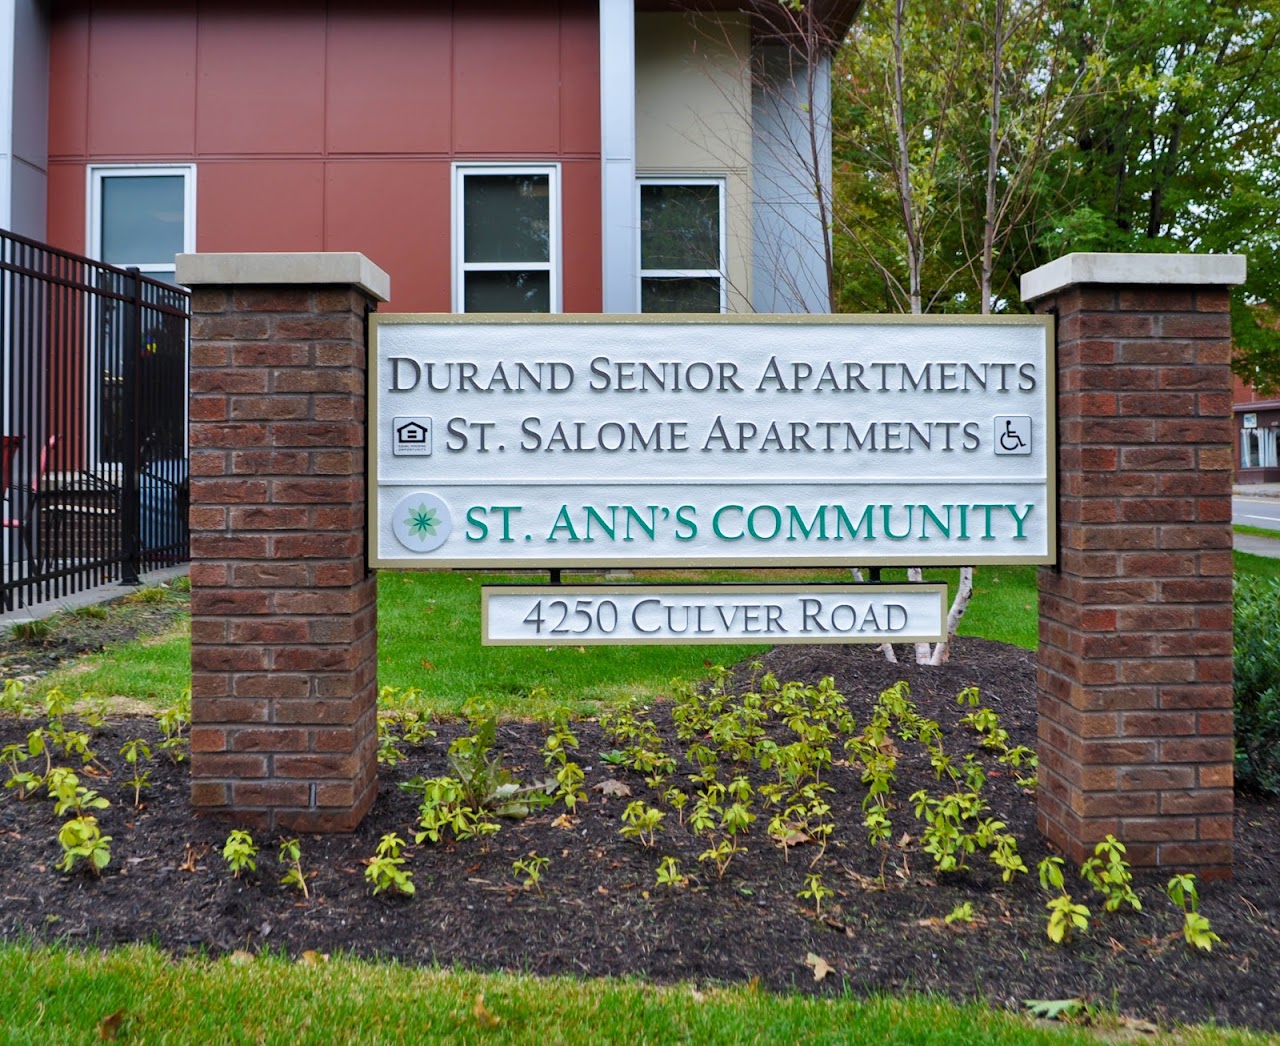 Photo of DURAND SENIOR APARTMENTS. Affordable housing located at 4225 CULVER ROAD IRONDEQUOIT, NY 14622